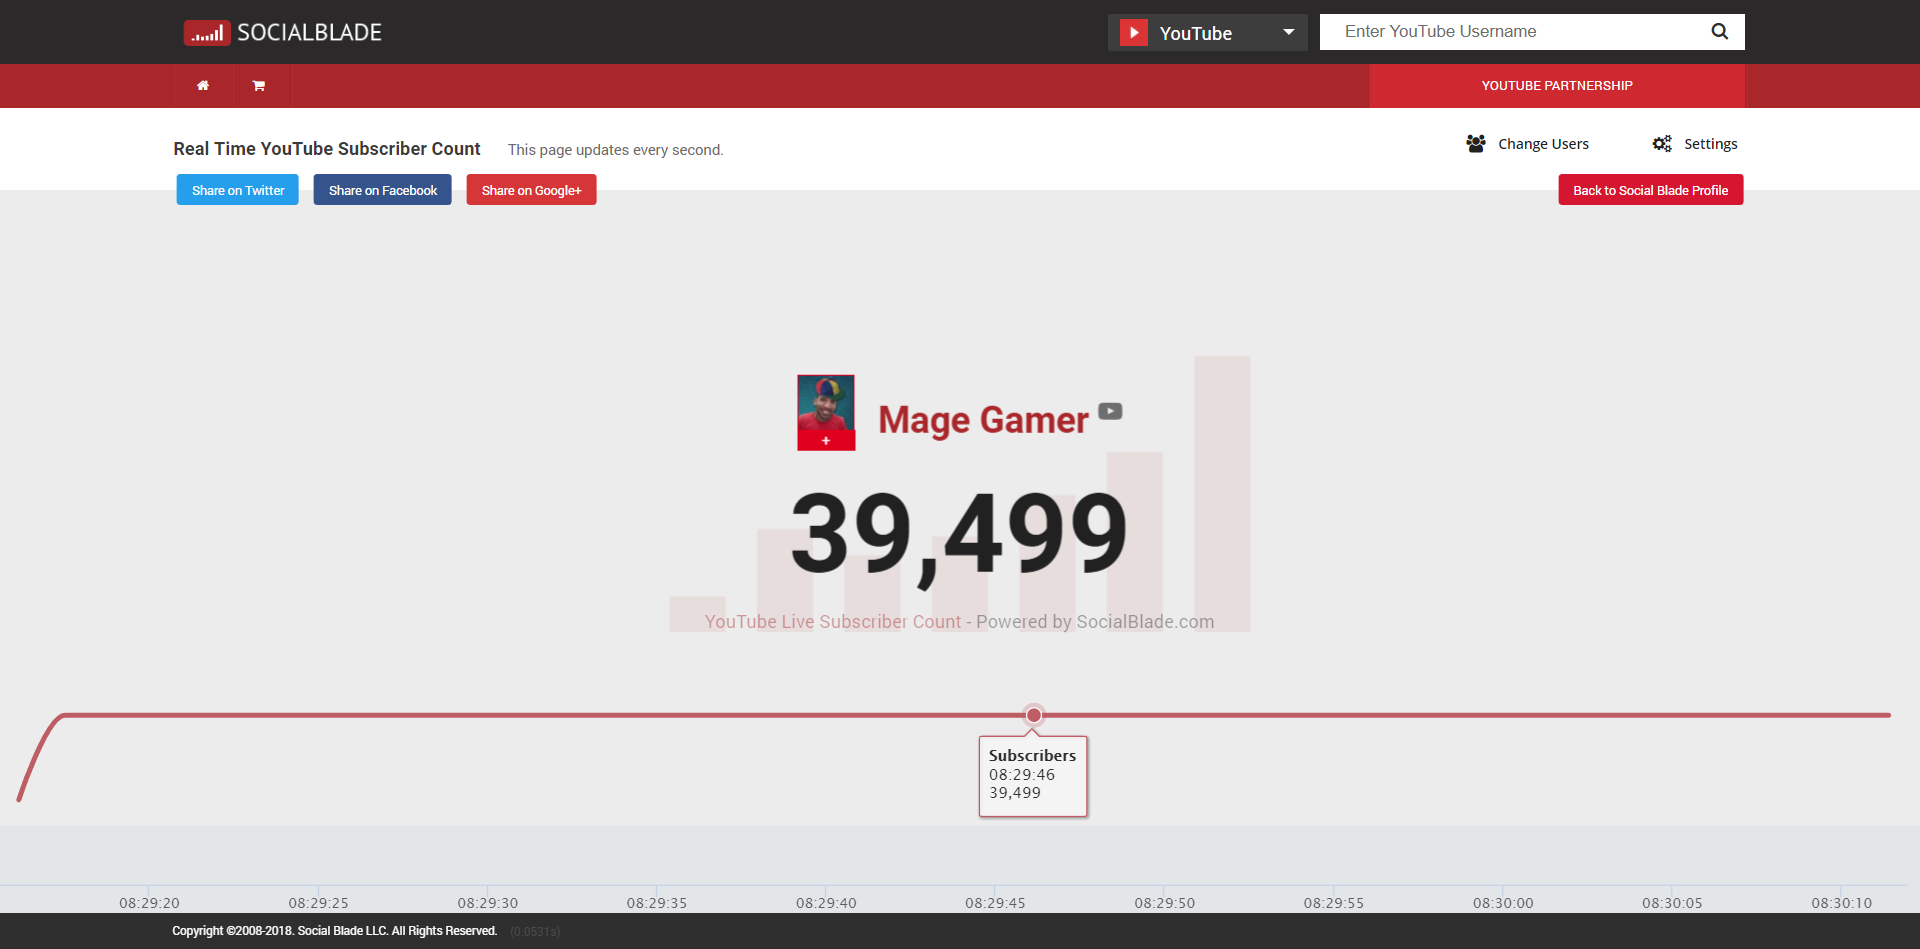 Live Sub Count - Social Blade on the App Store